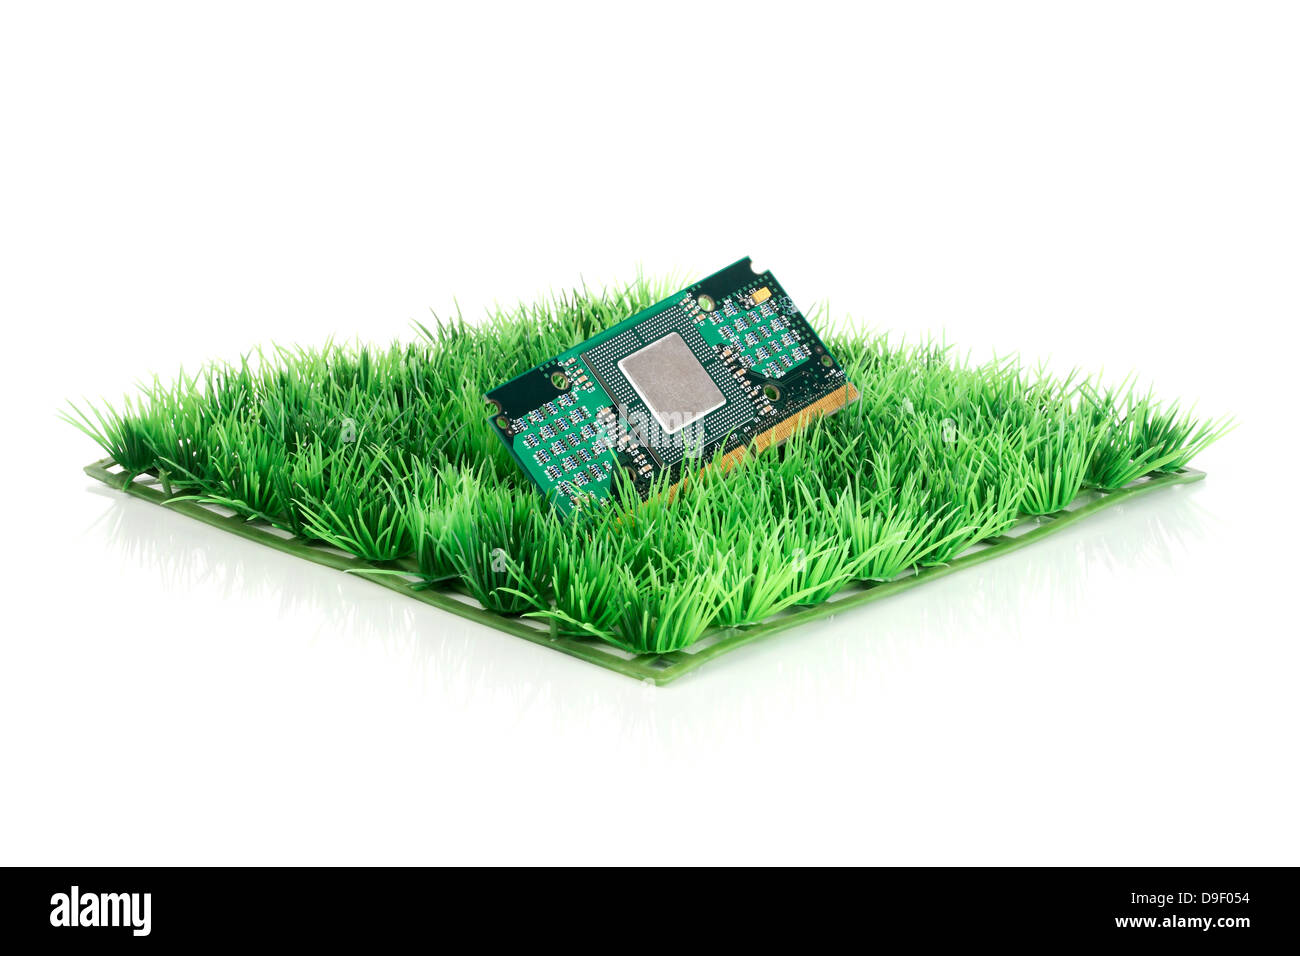 To platinum with processor base on art lawn Board with processor socket on synthetic Grass Stock Photo